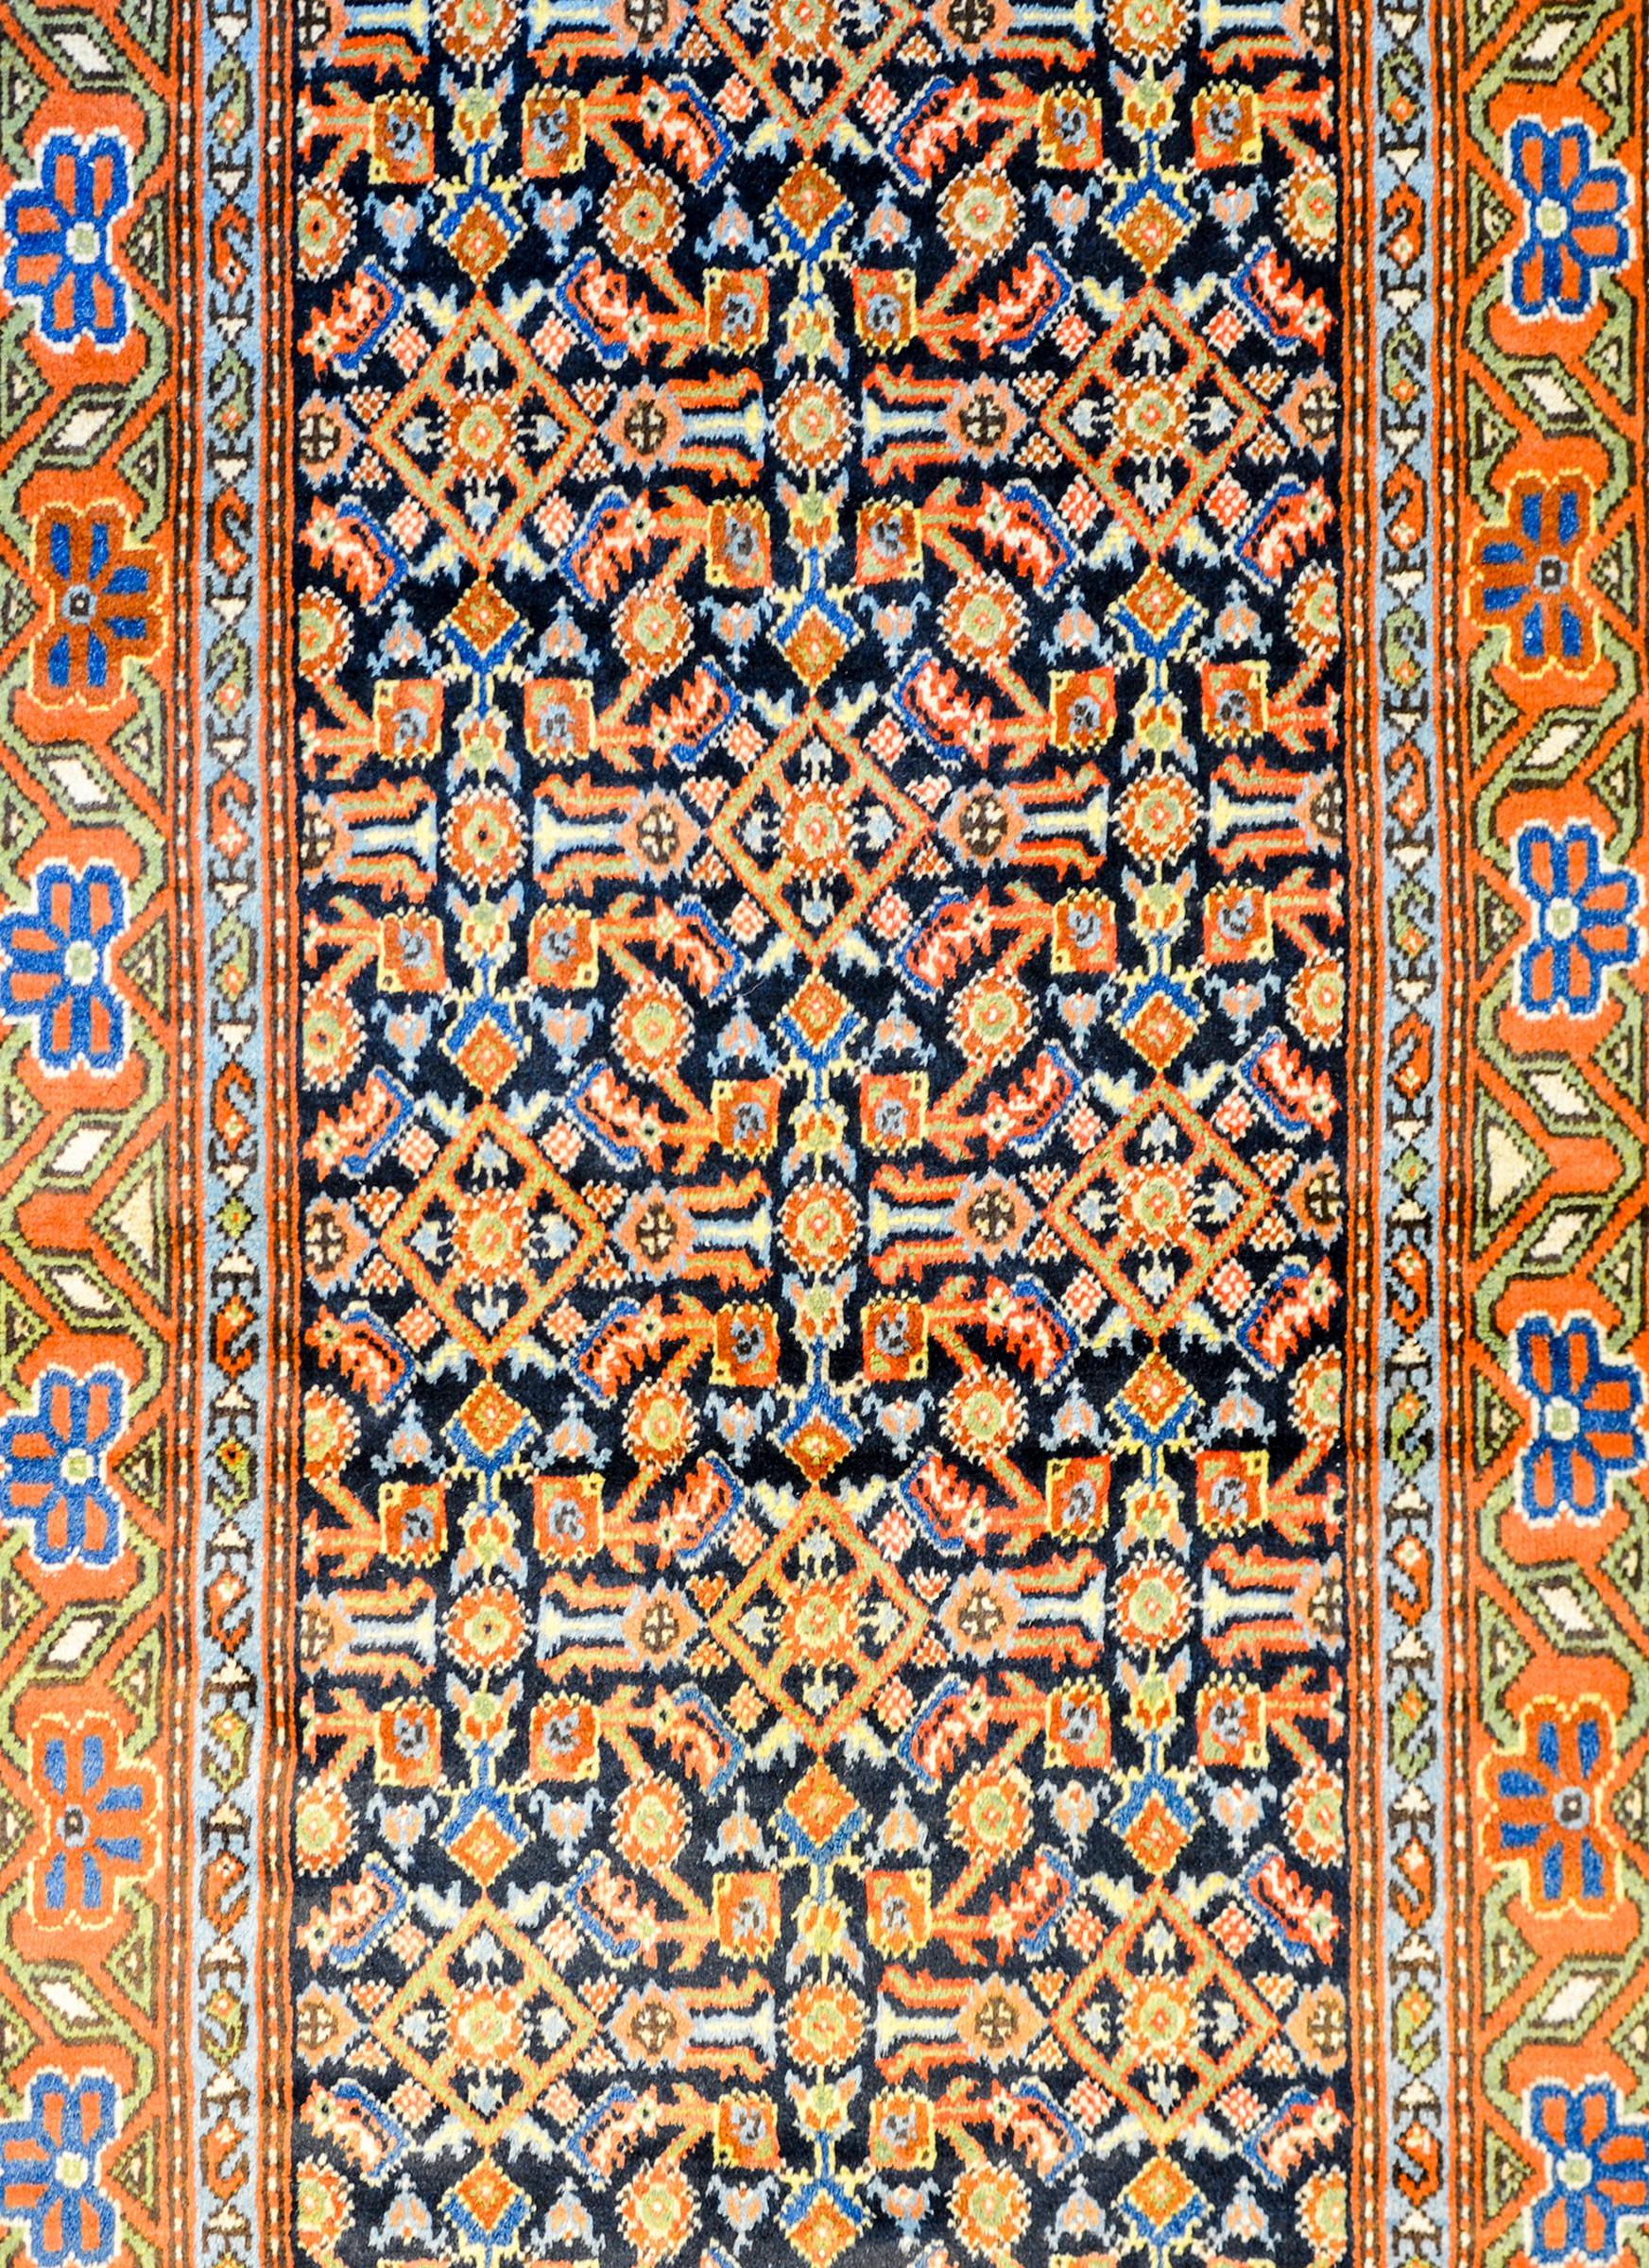 A wonderful antique East Turkistan Herati rug with an all-over multicolored trellis pattern with leaves and stylized flowers on a black background. The border is wonderful with a wide central floral stripe flanked by petite floral patterned stripes.